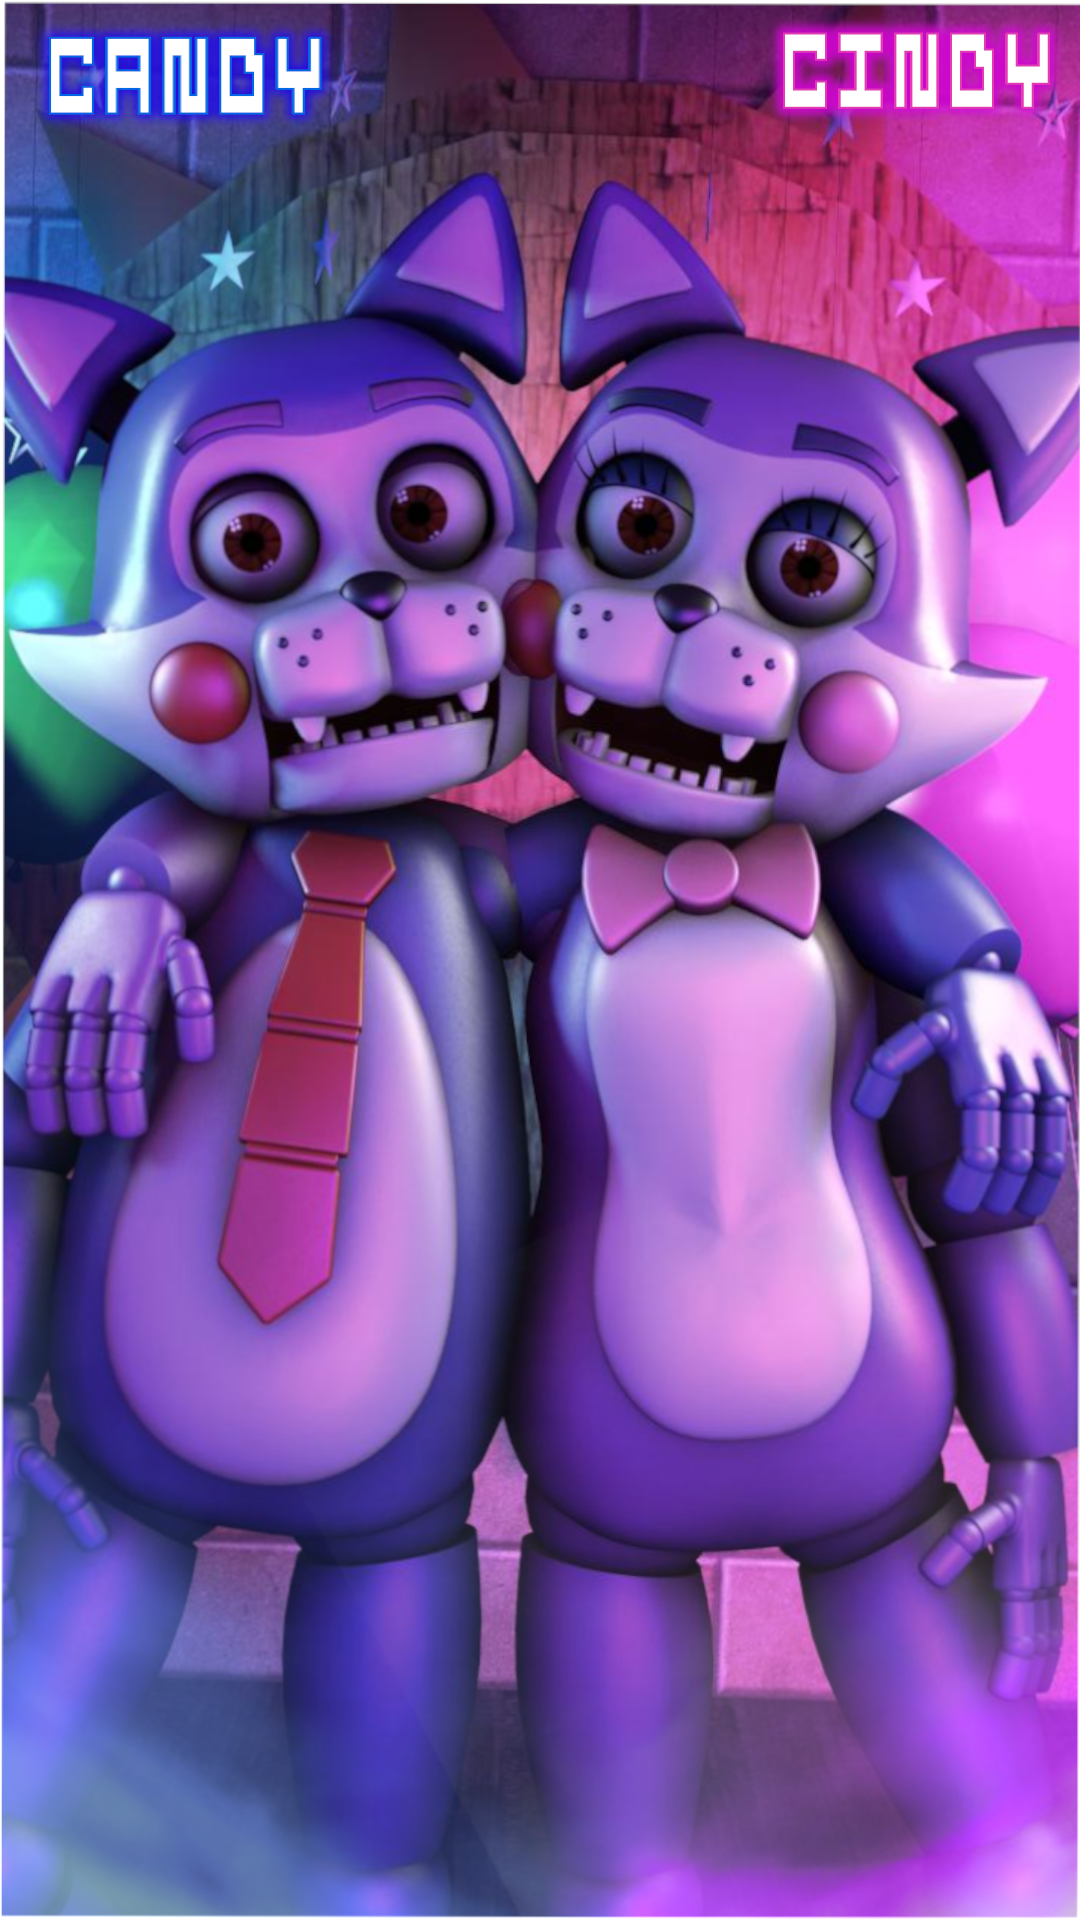 Monster Cindy and Monster Candy - FNAC 3 by MarkRoosien on DeviantArt